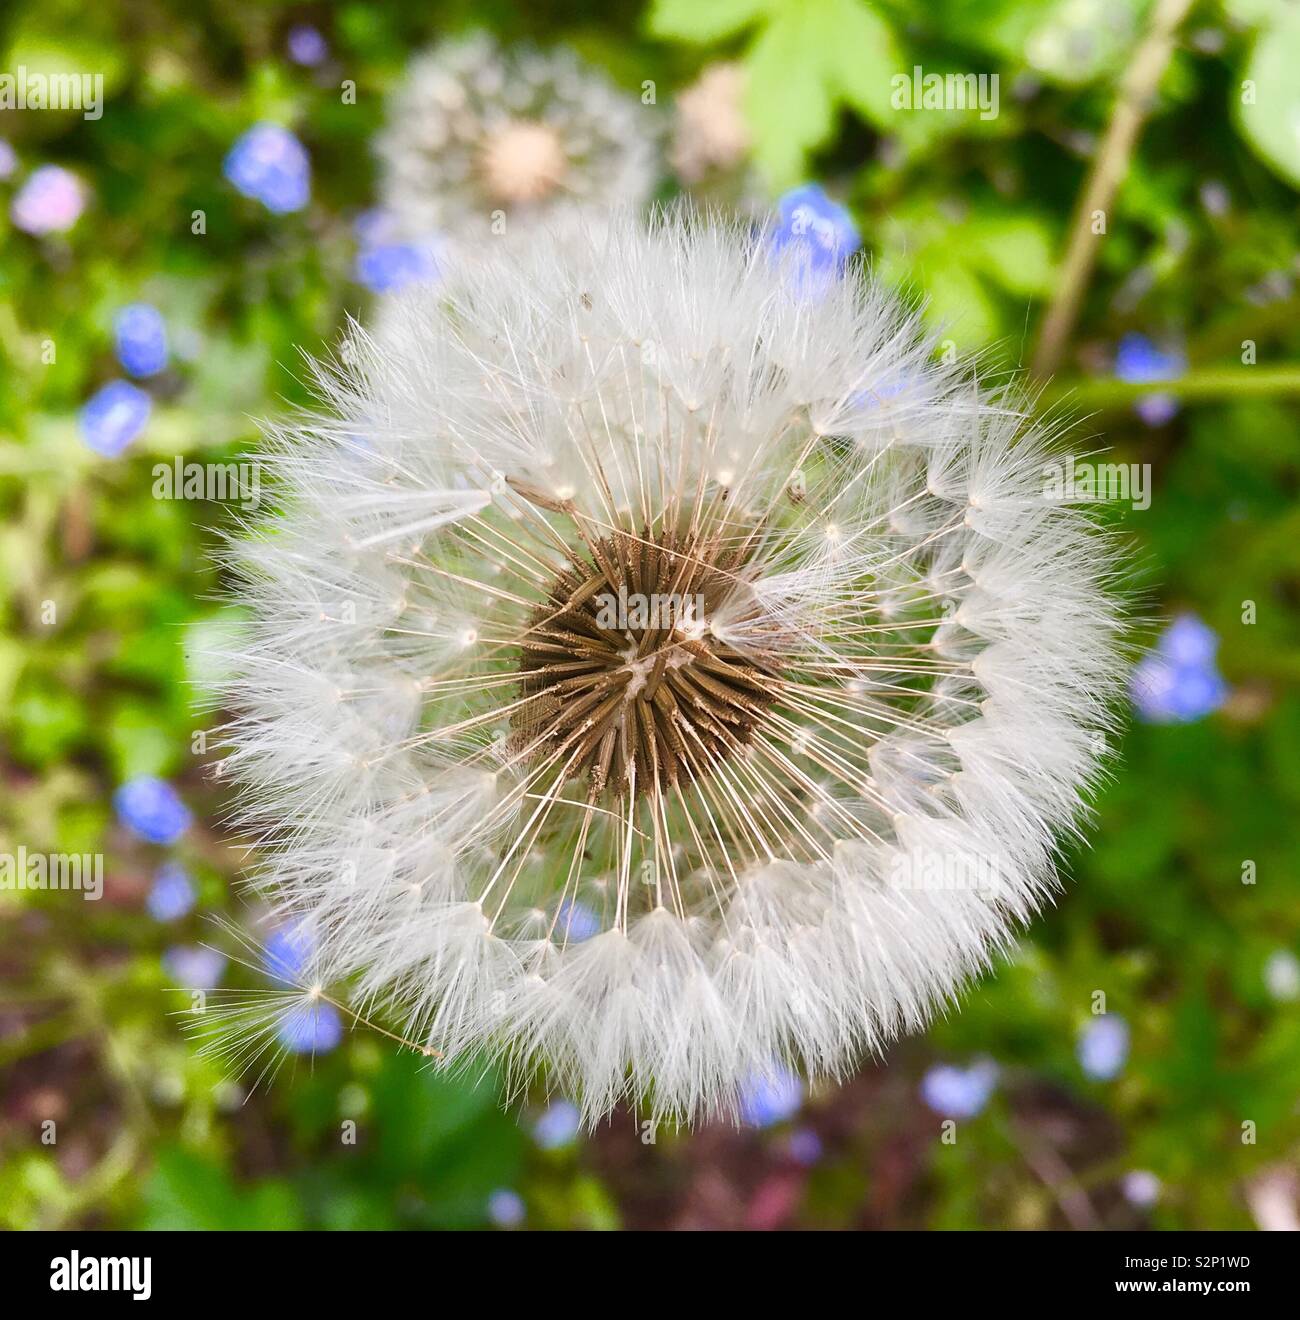 A dandelion seedhead, commonly known as a puffball, against a background of forget me nots. Stock Photo